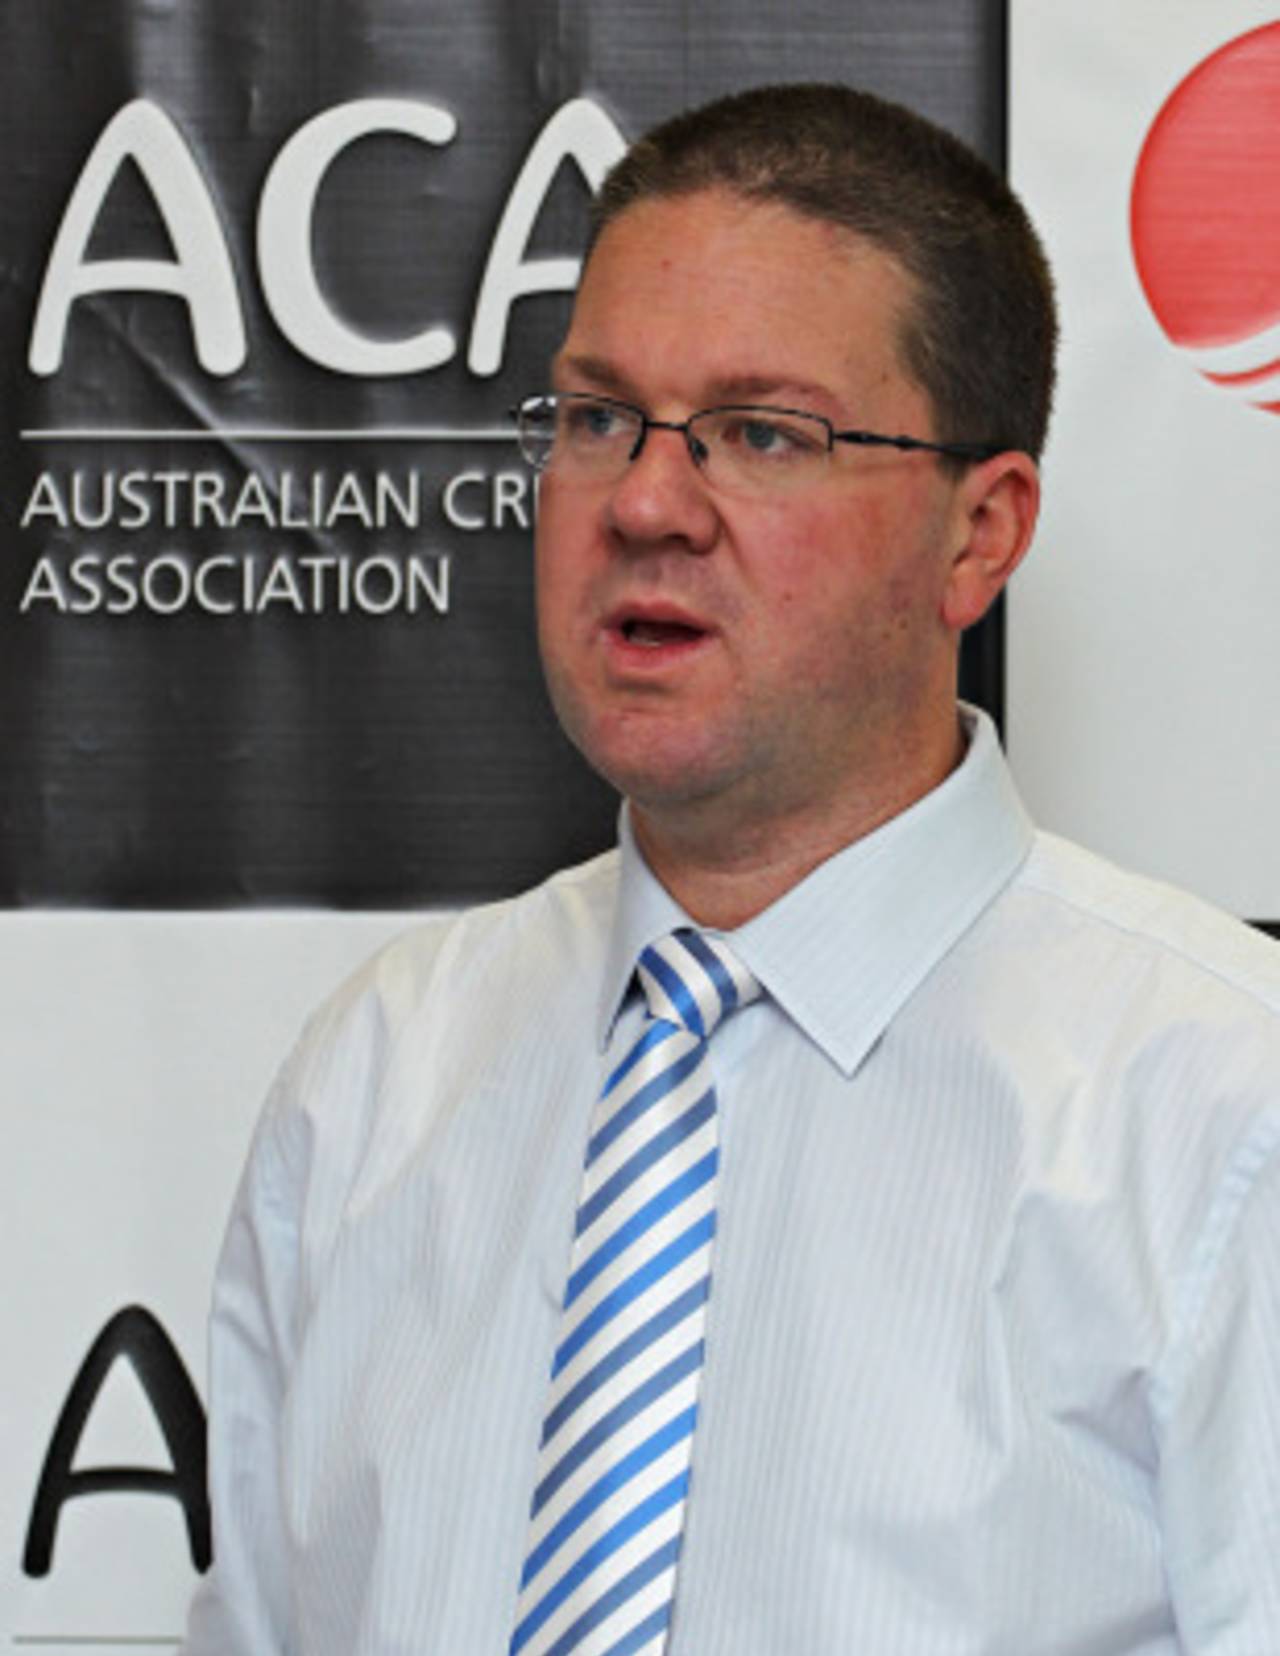 ACA chief Paul Marsh: "I don't want this to sound like we're trying to get this tour stopped, because we're not. But it's our job to assess the conditions professionally."&nbsp;&nbsp;&bull;&nbsp;&nbsp;Australian Cricketers' Association